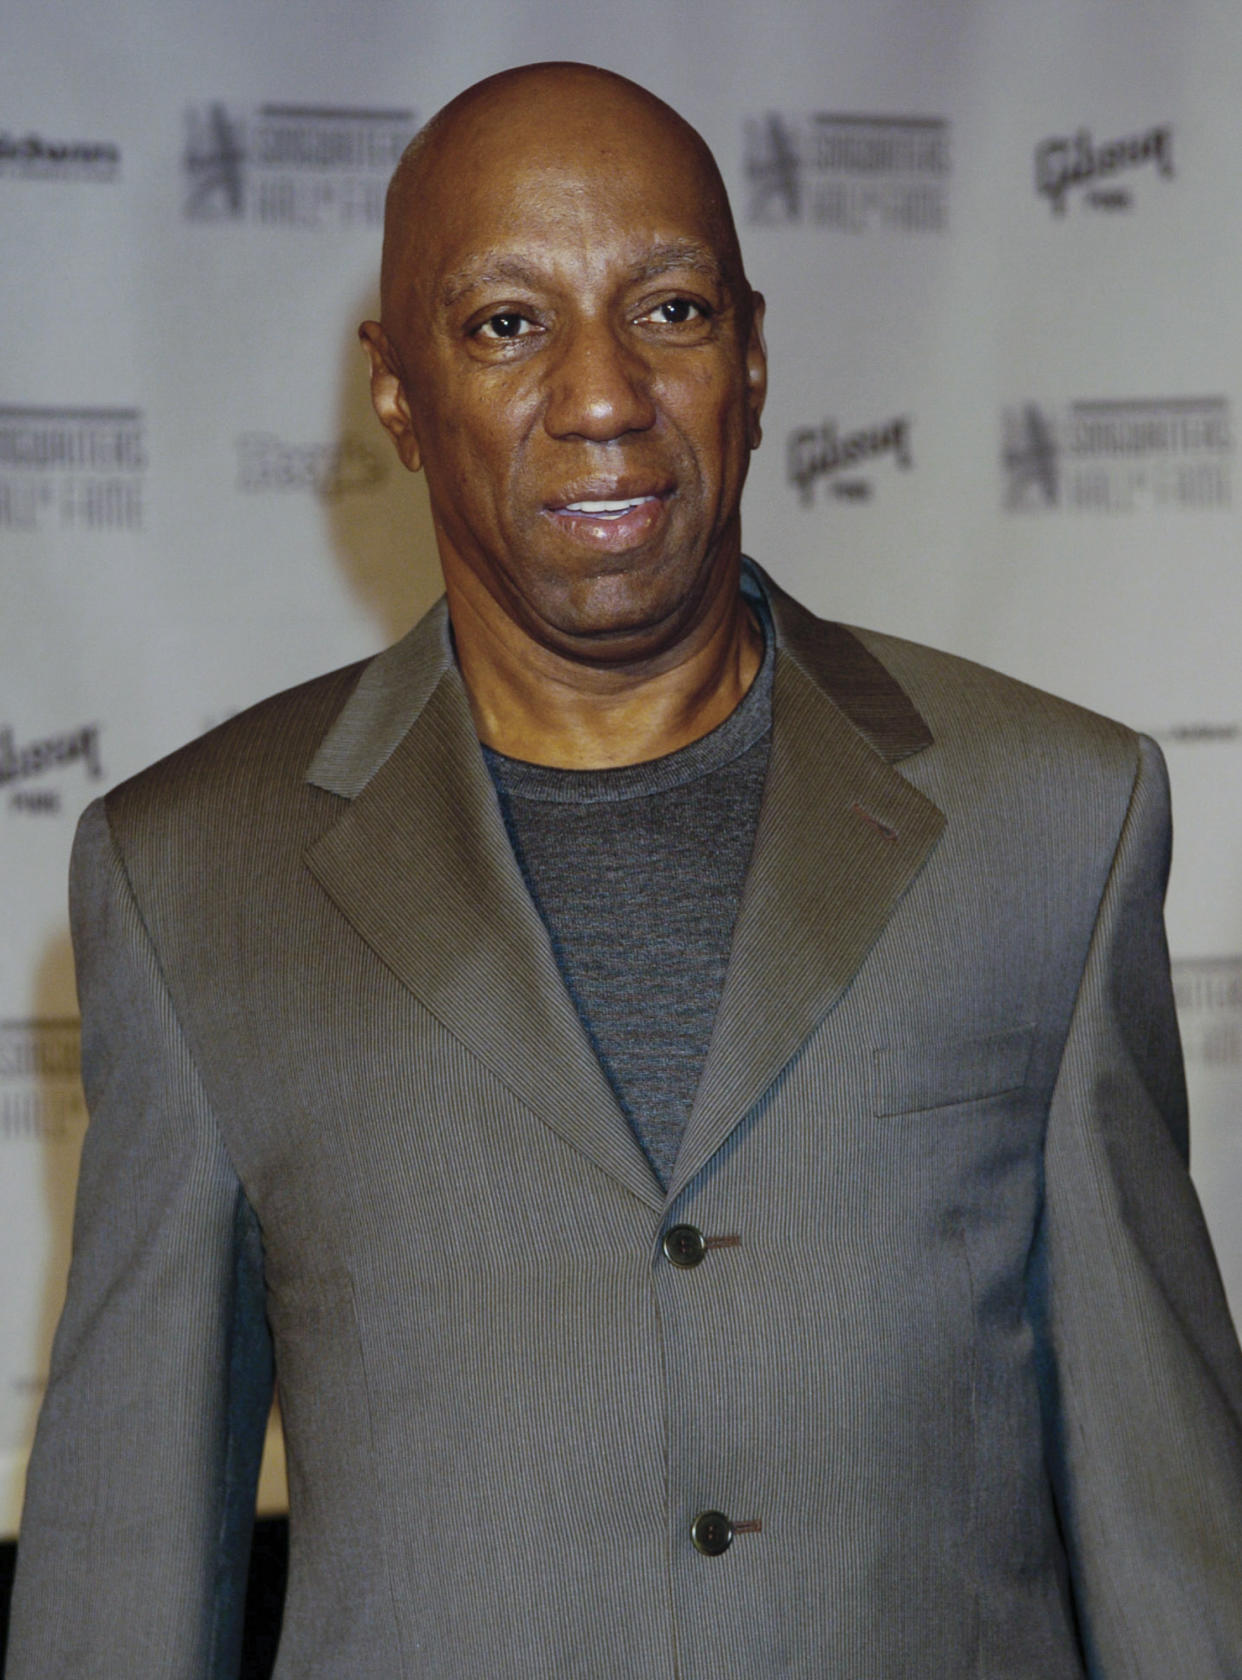 FILE - Motown's Barrett Strong arrives at the induction ceremony for 35th annual National Academy of Popular Music/Songwriters Hall of Fame in New York on June 10, 2004. Strong, one of Motown’s founding artists and most gifted songwriters who sang lead on the company’s breakthrough single “Money (That’s What I Want)” and later collaborated with Norman Whitfield on such classics as “I Heard It Through the Grapevine,” “War” and “Papa Was a Rollin’ Stone,” has died. He was 81. His death was announced Sunday, Jan. 29, 2023, by the Motown Museum. (AP Photos/Louis Lanzano, File)